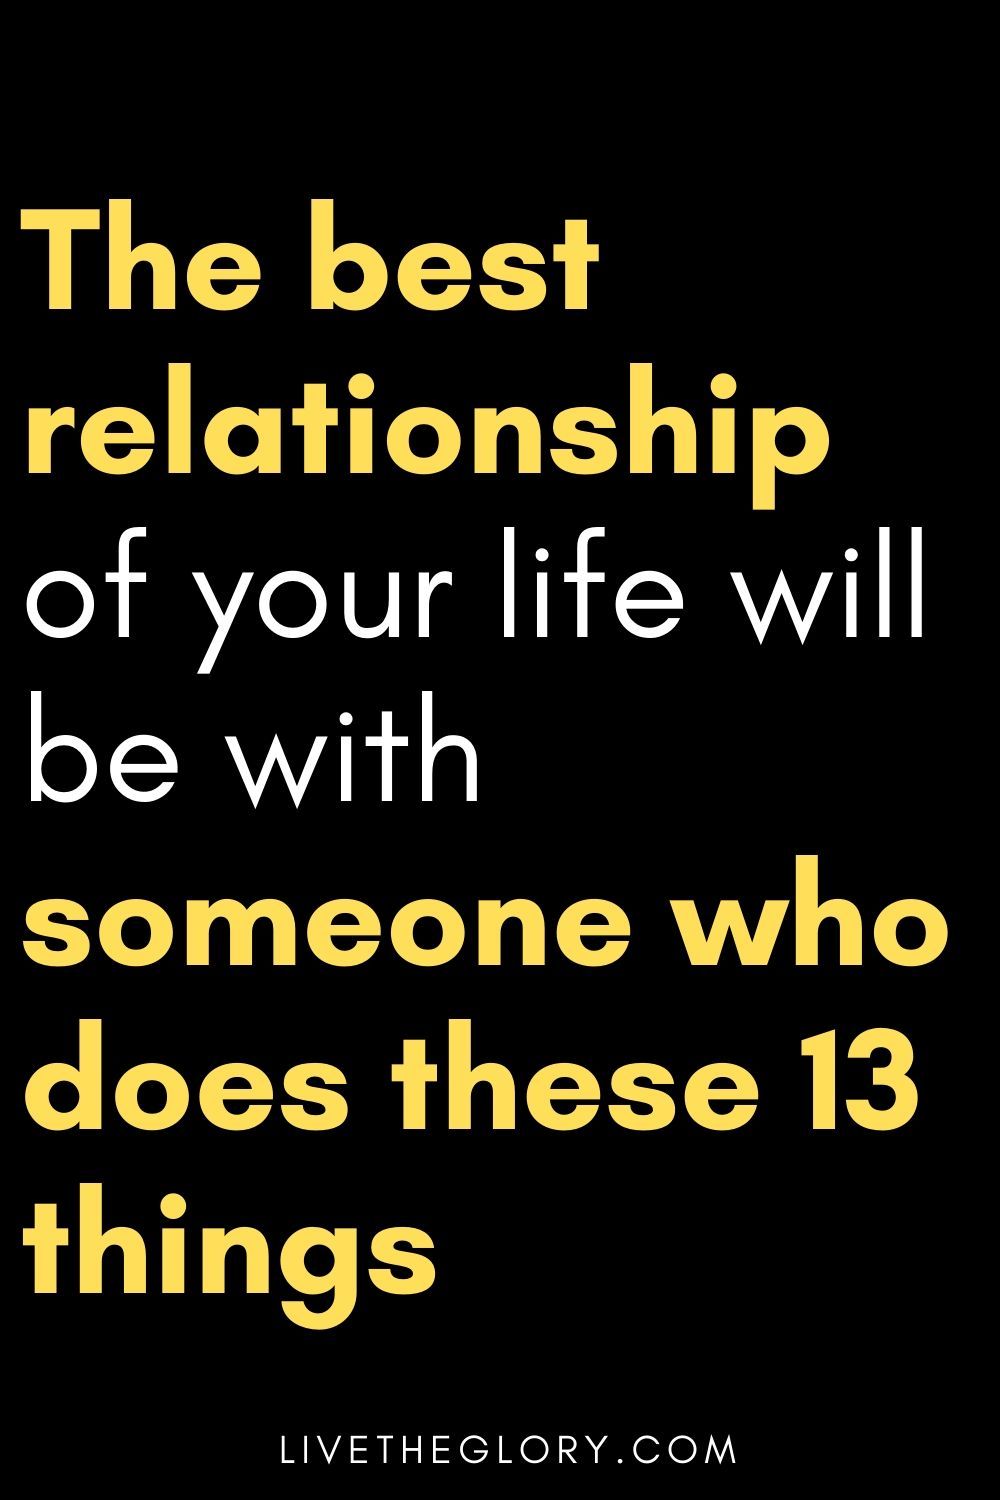 The best relationship of your life will be with someone who does these 13 things - Live the glory